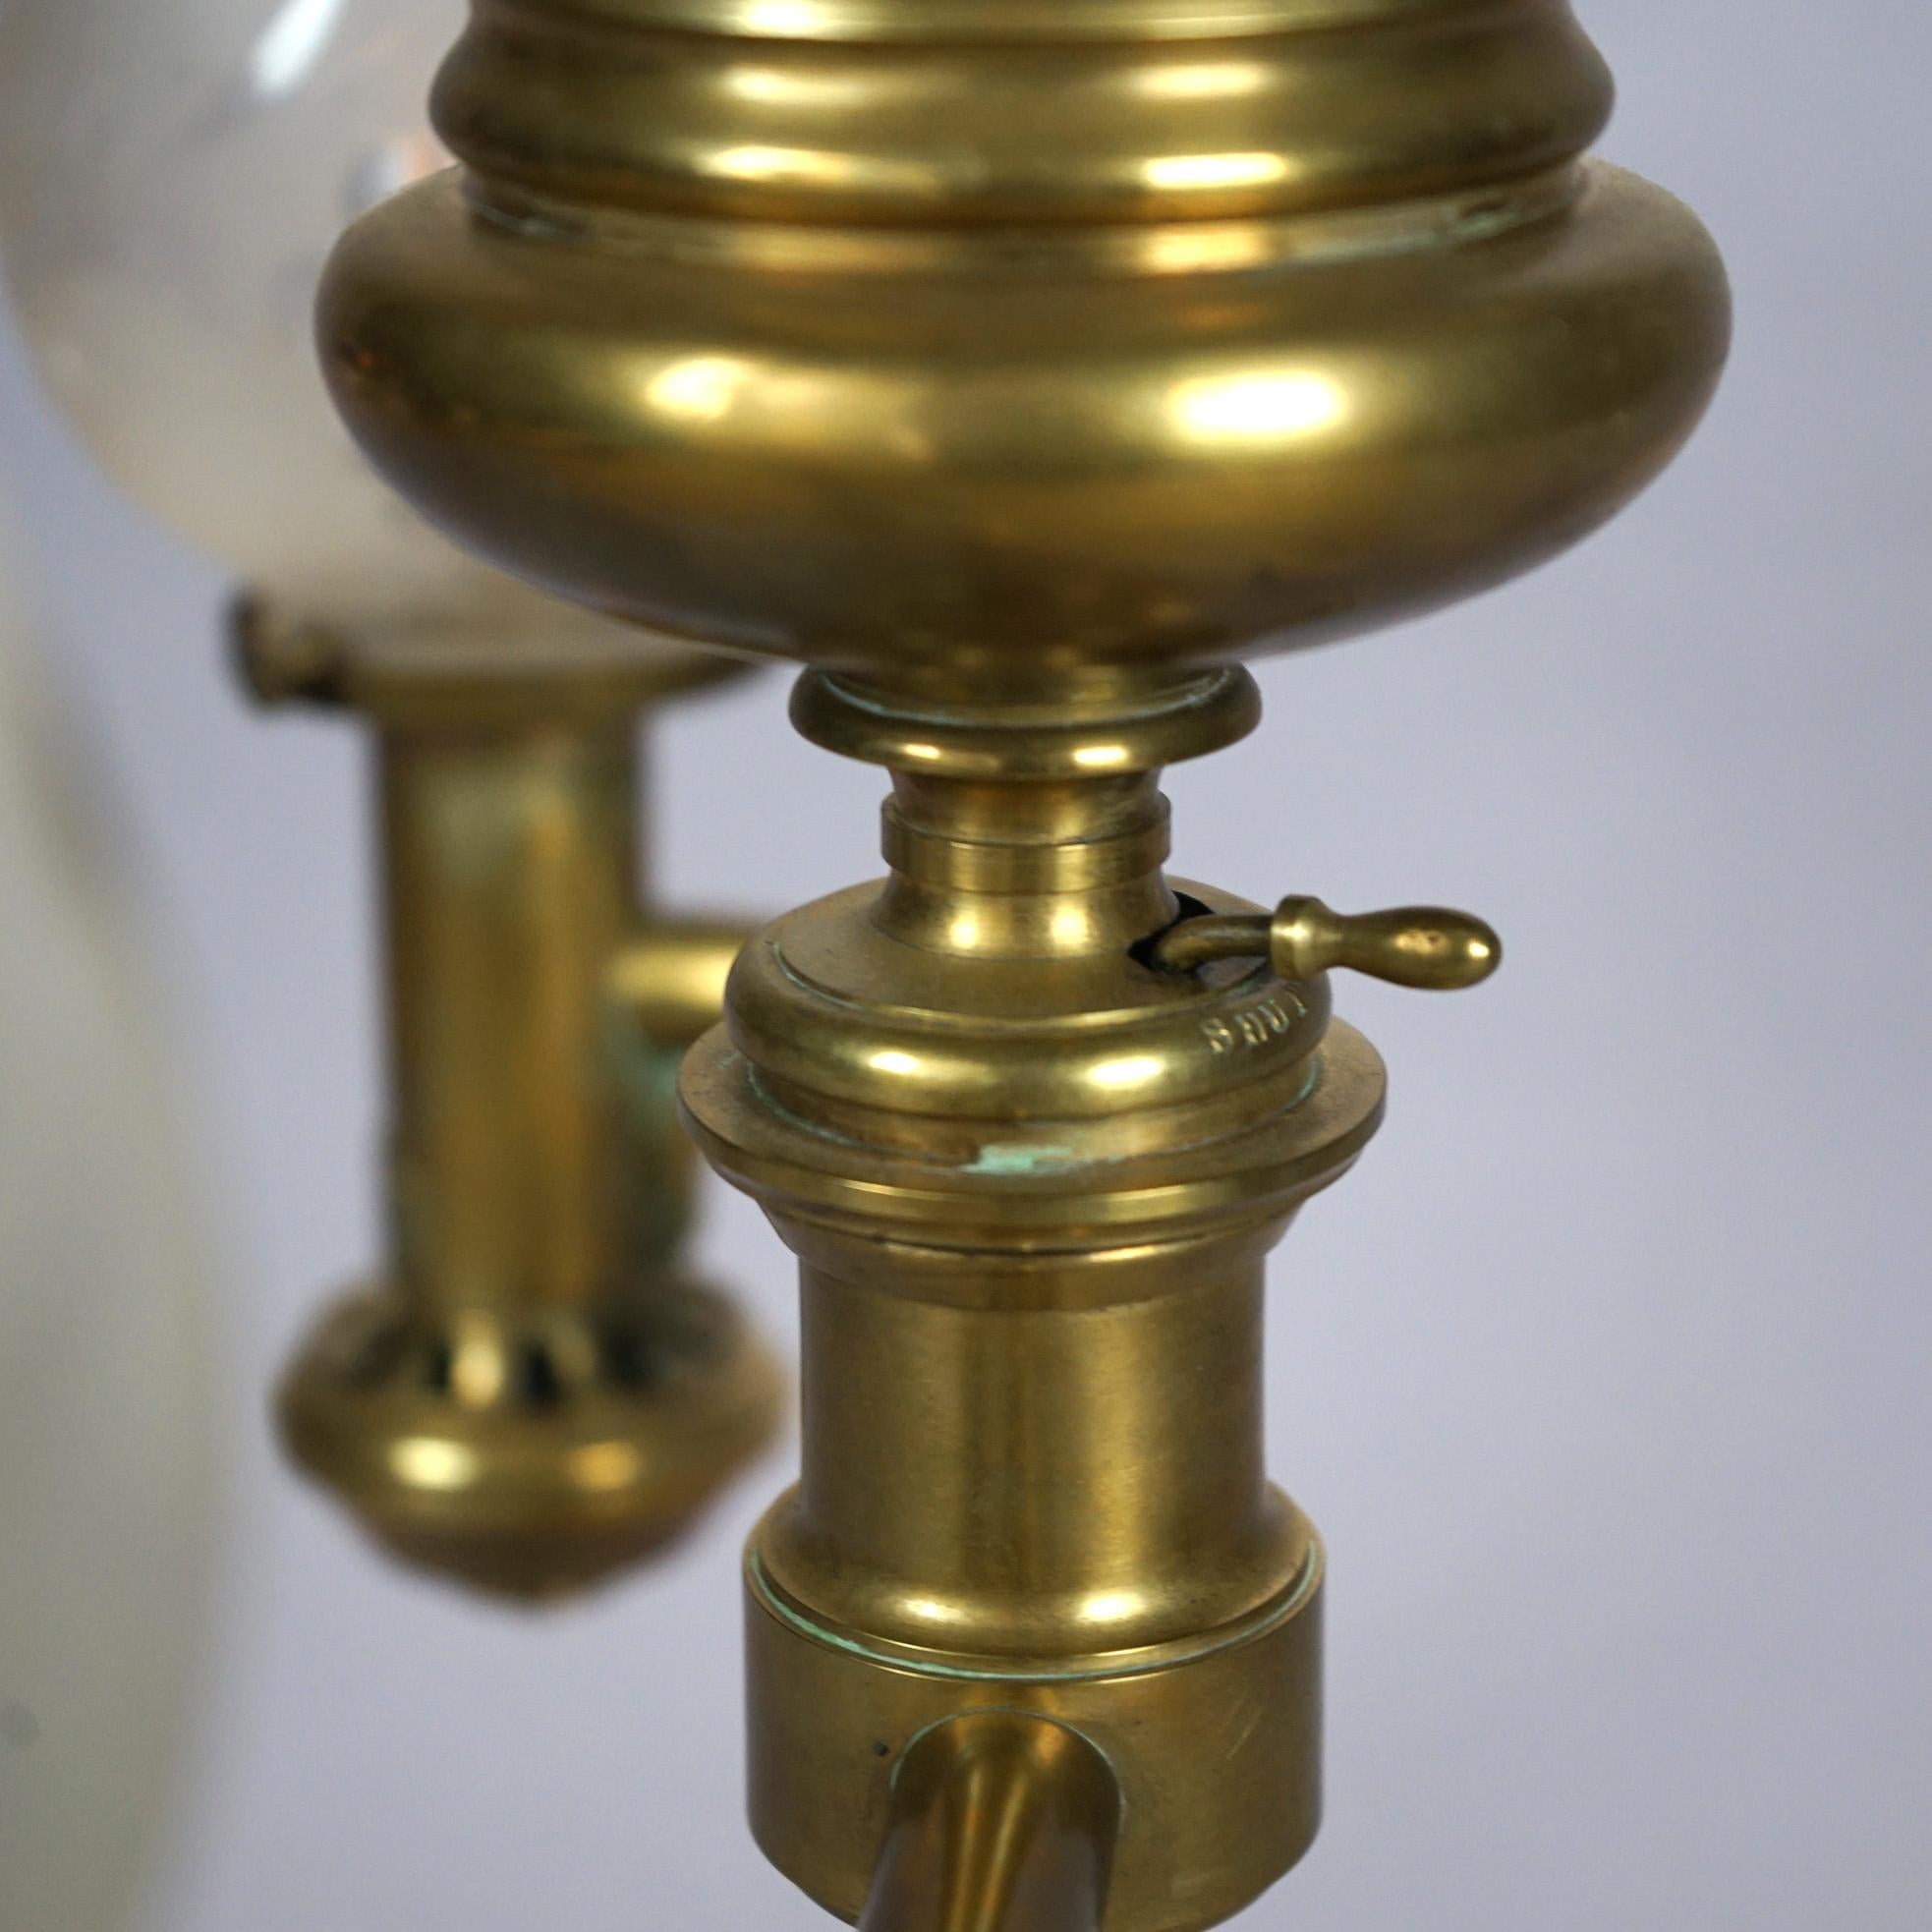 Antique Gilt Brass & Bronze Double Argand Lamp with Shades, circa 1820 For Sale 5